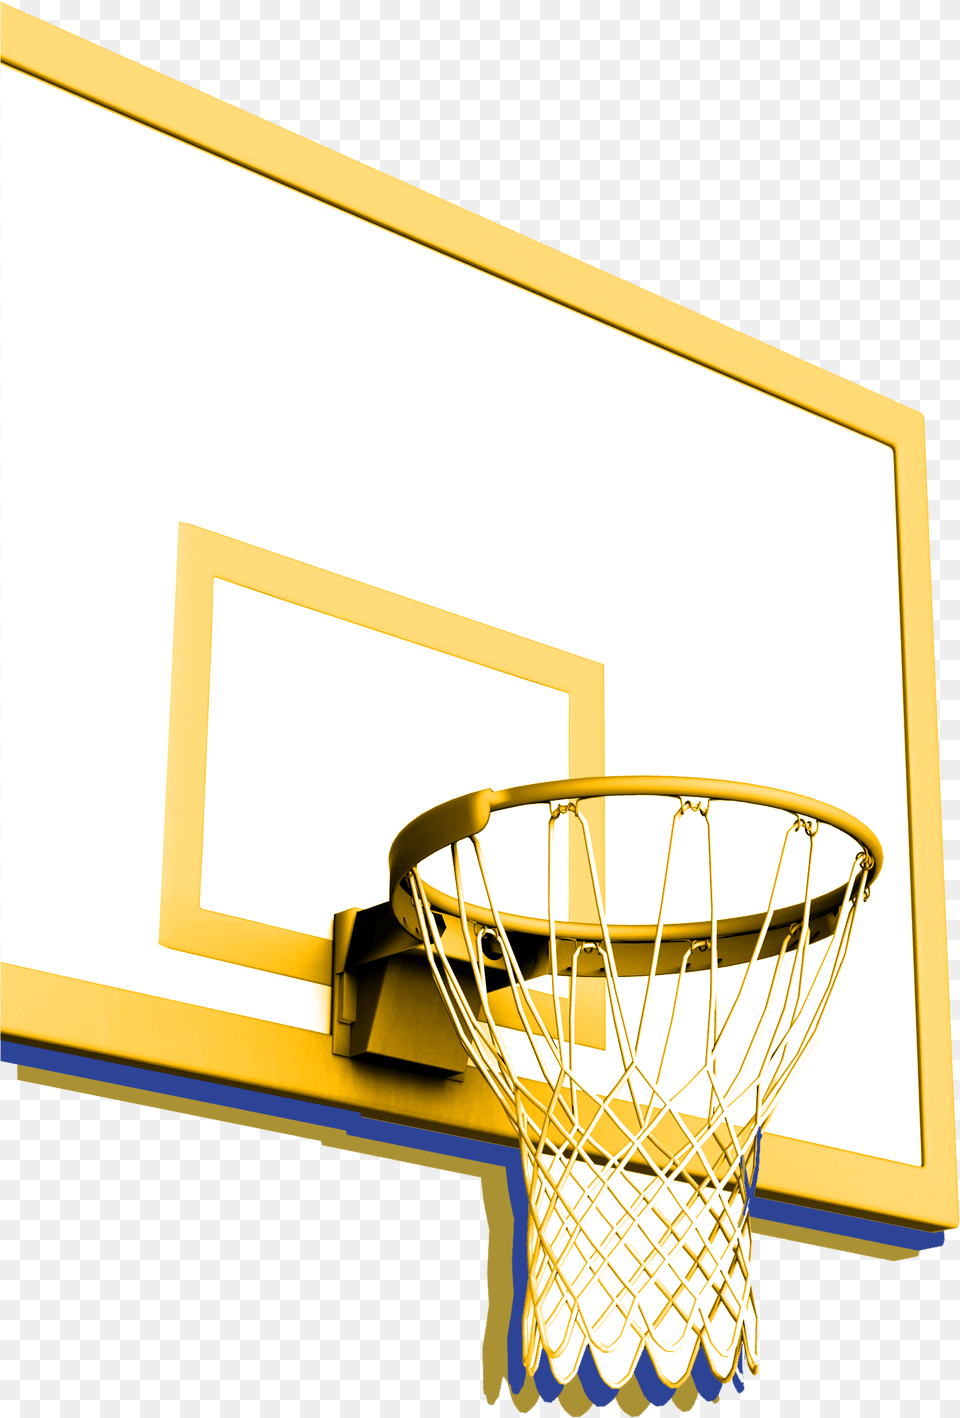 The Ultimate Golden State Warriors Basketball Rim, Hoop Png Image